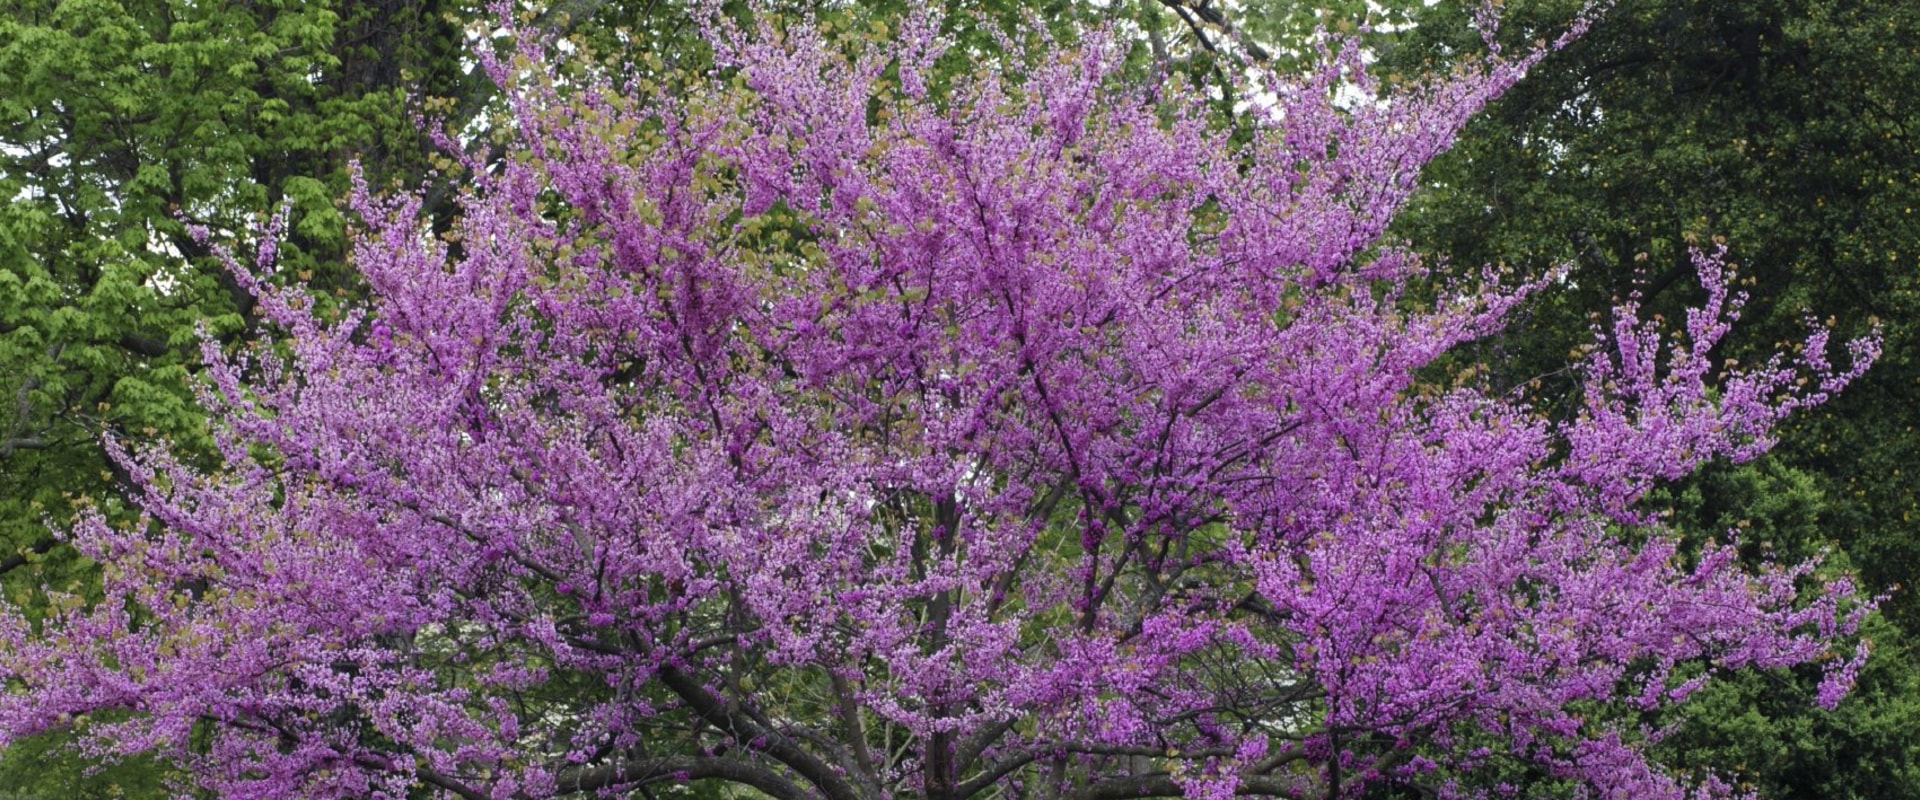 What is the most beautiful tree to plant?